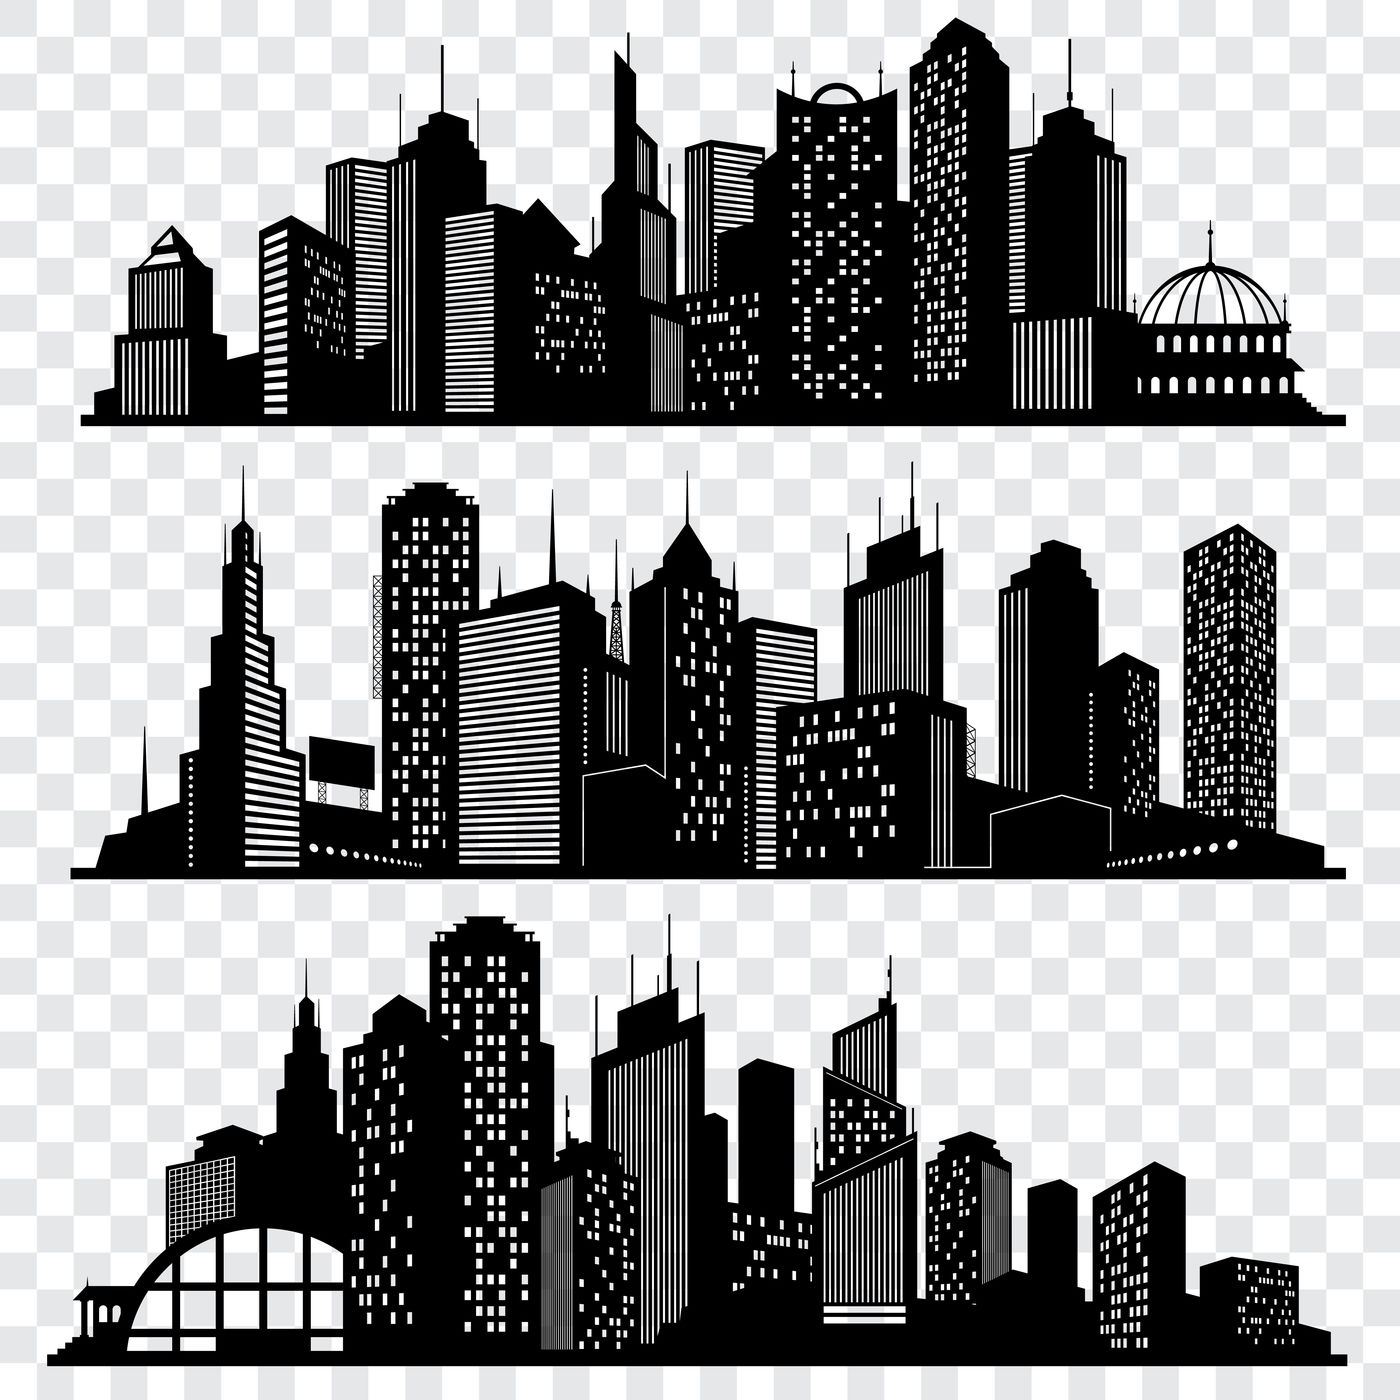 Cityscapes, town skyline buildings, big city silhouettes vector set By